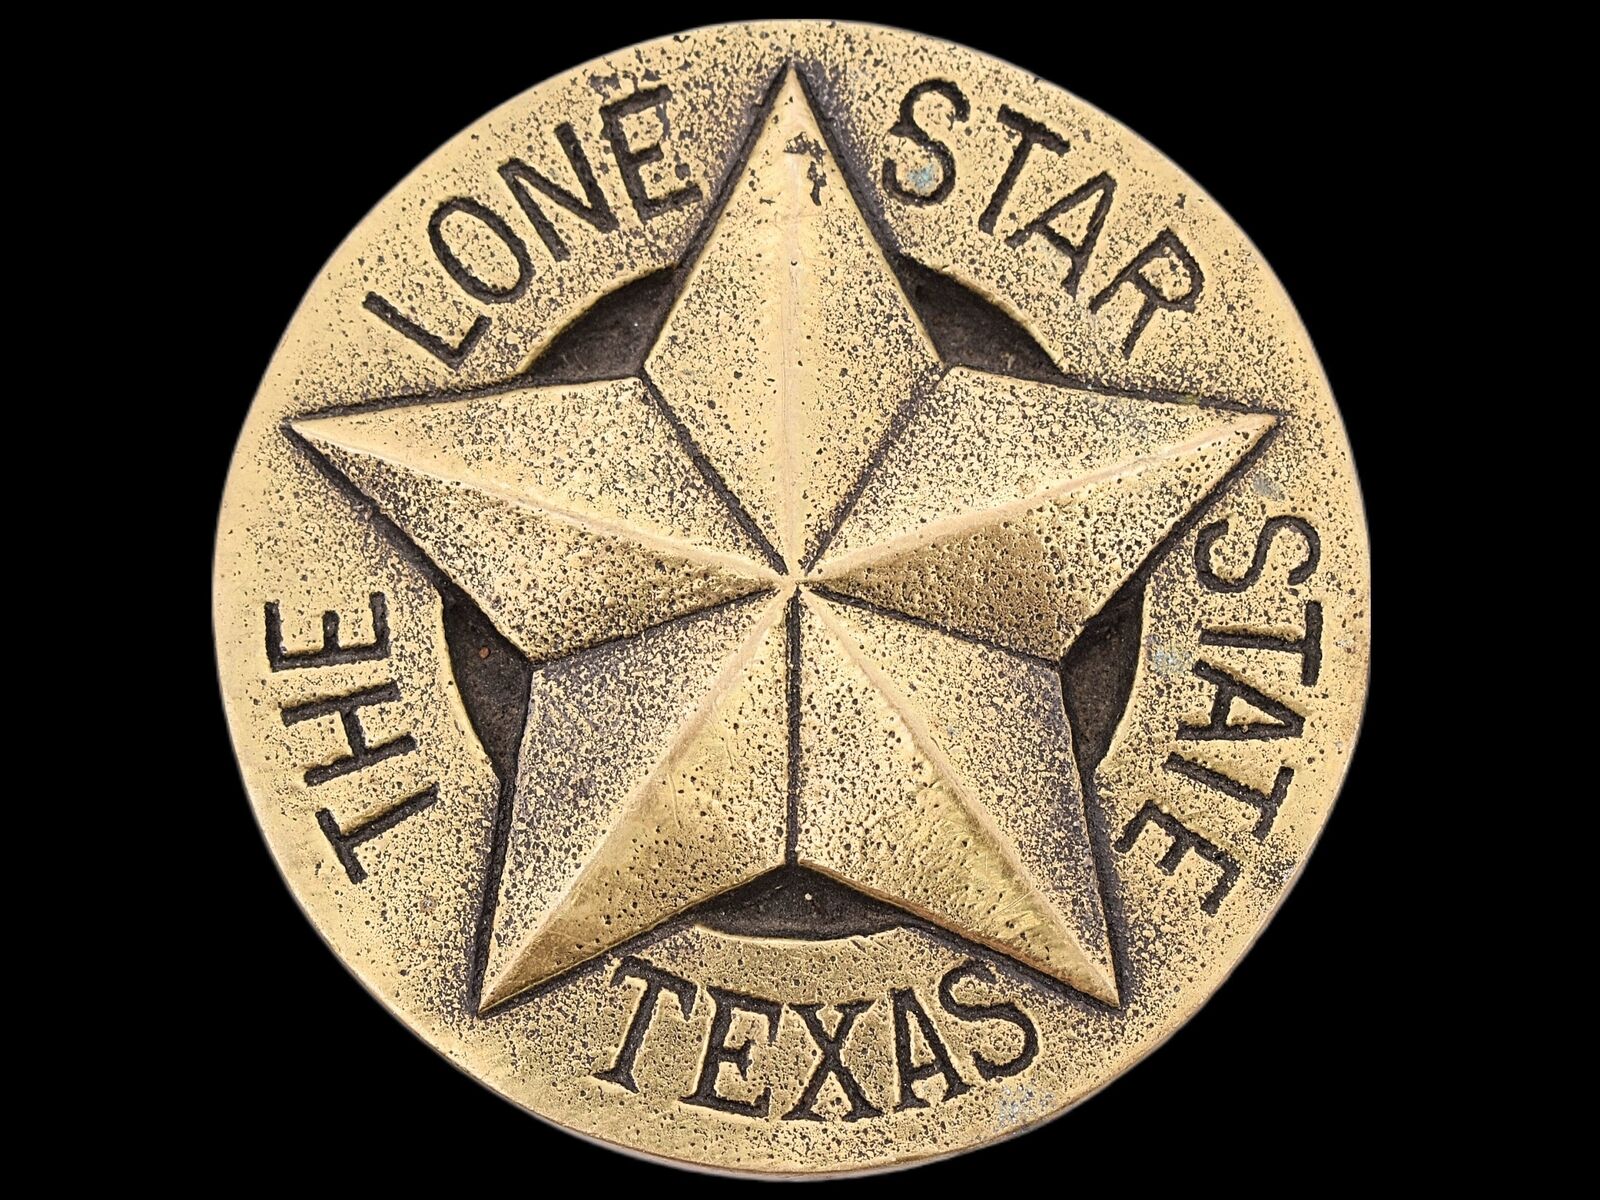 Solid Brass Texas Lone Star State 1970s Vintage Belt Buckle